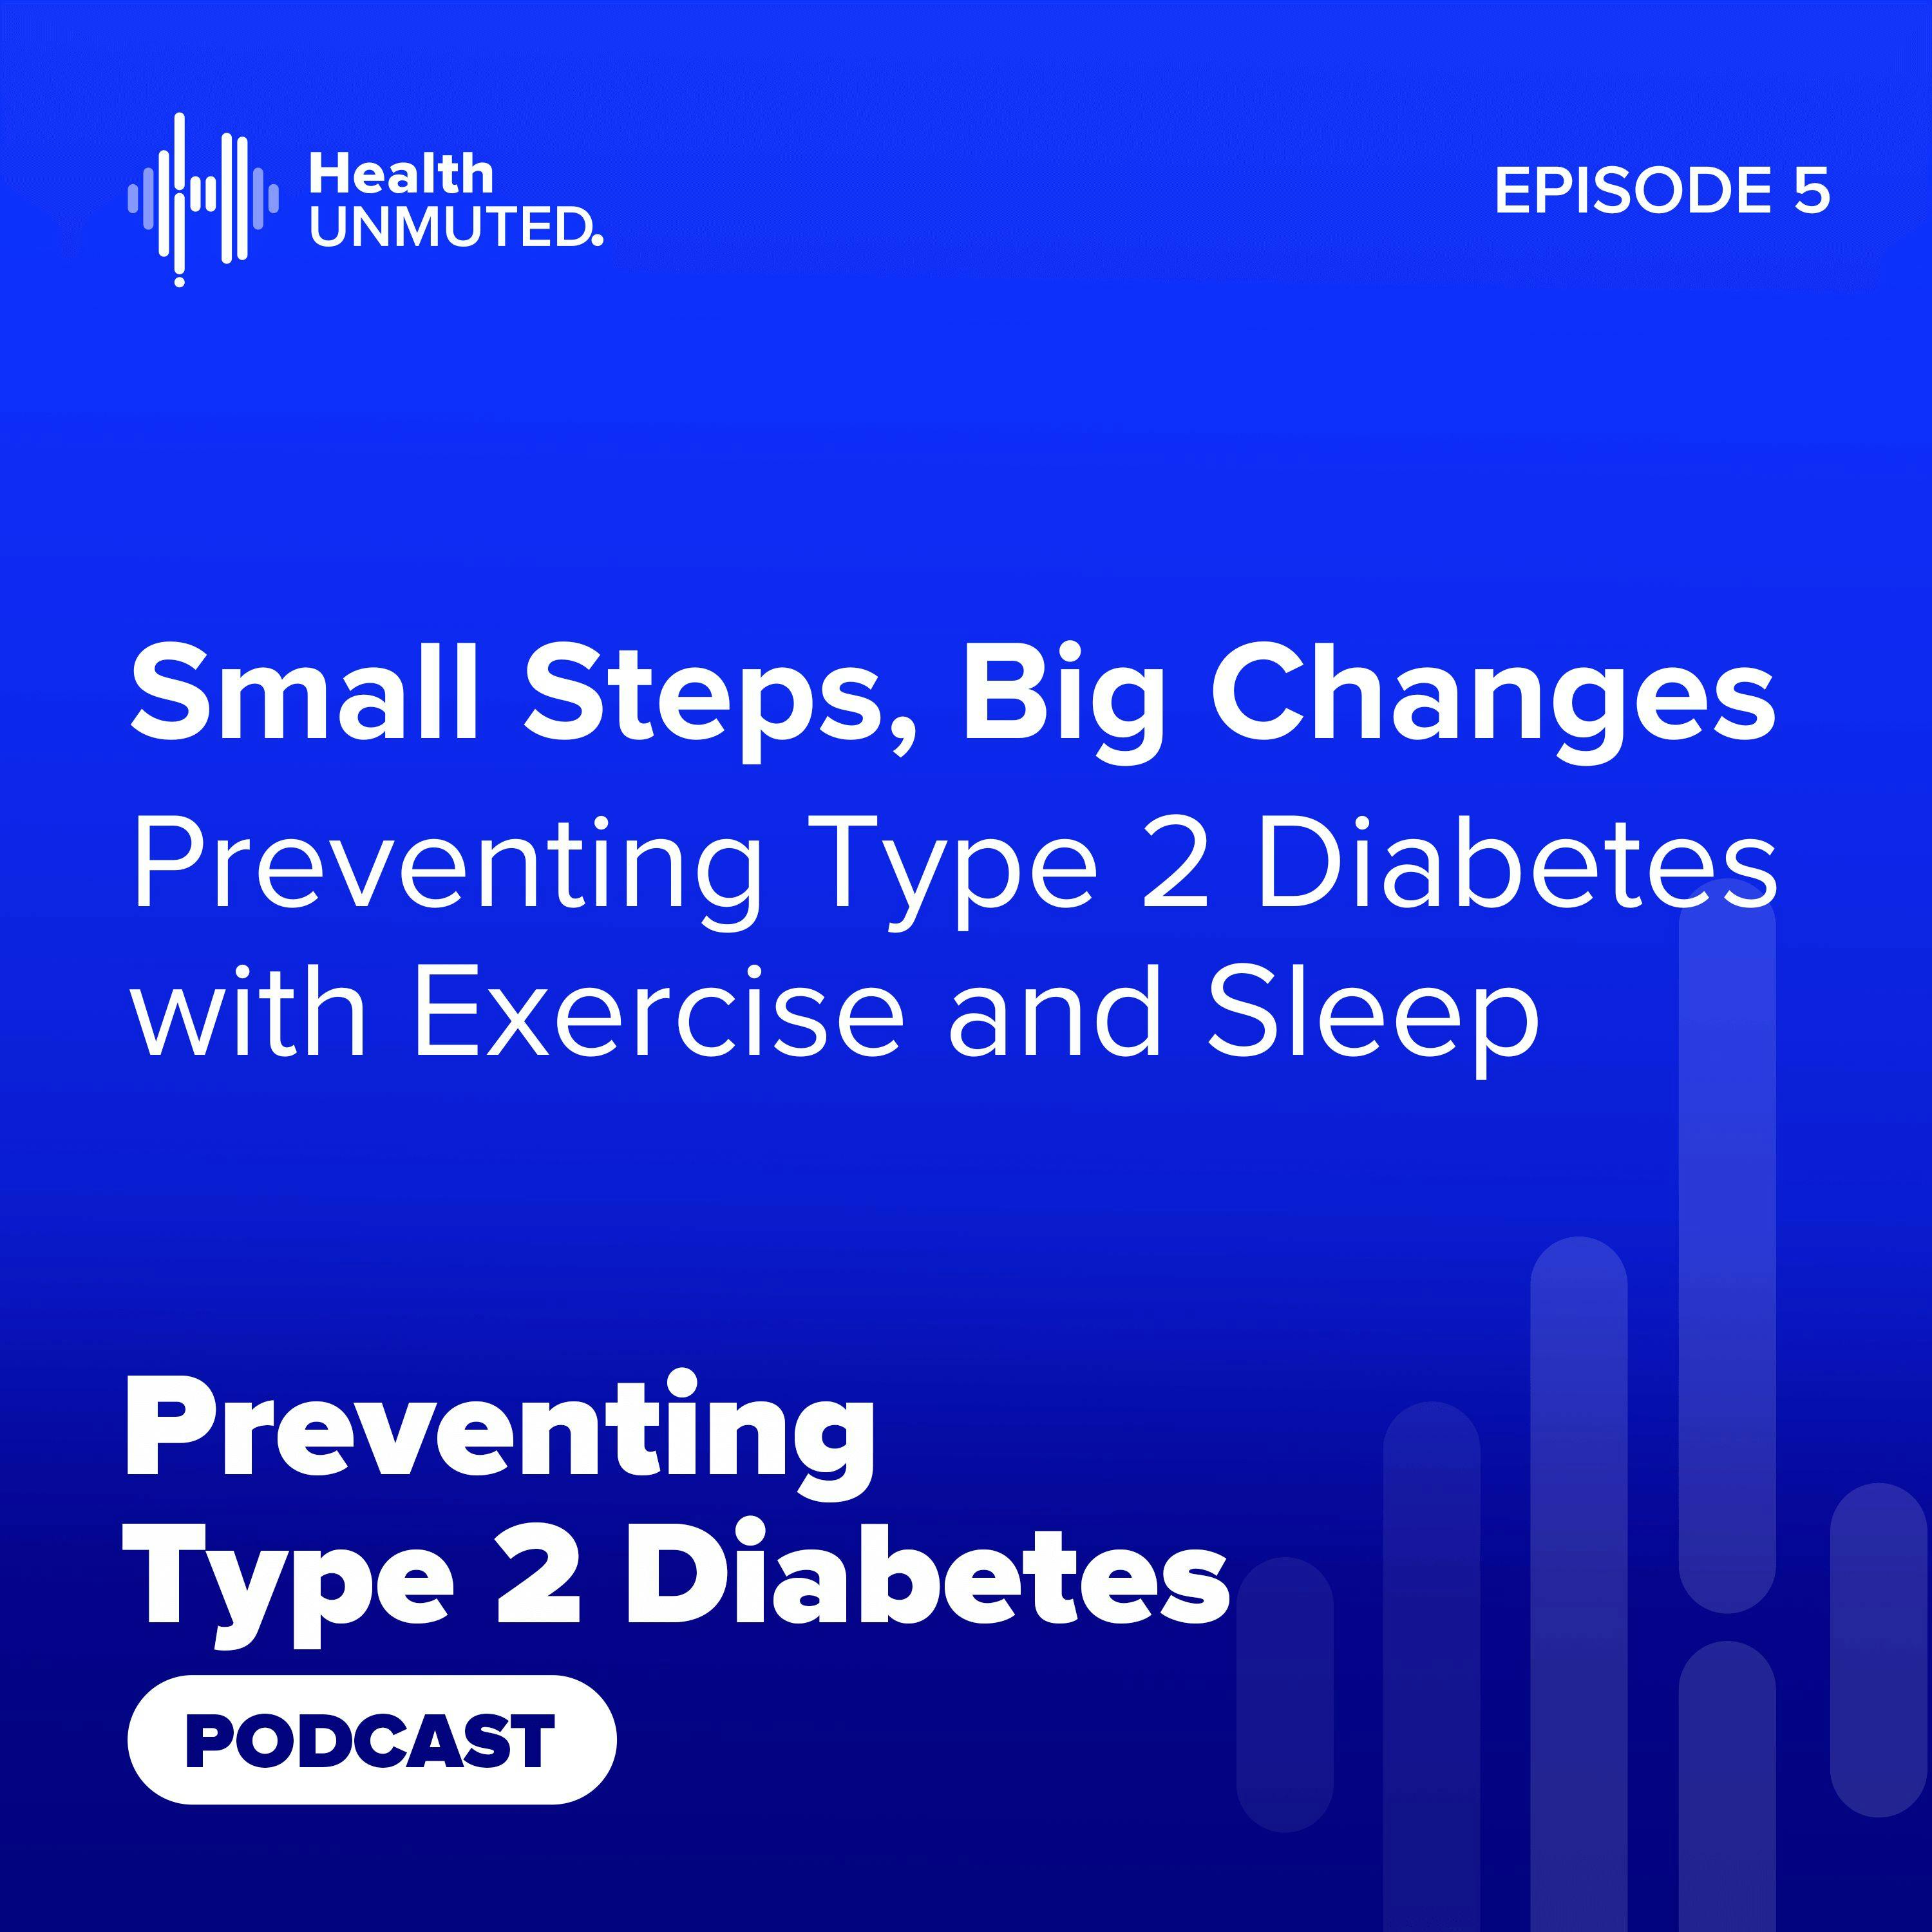 Ep05: Small Steps, Big Changes: Preventing Type 2 Diabetes with Exercise and Sleep